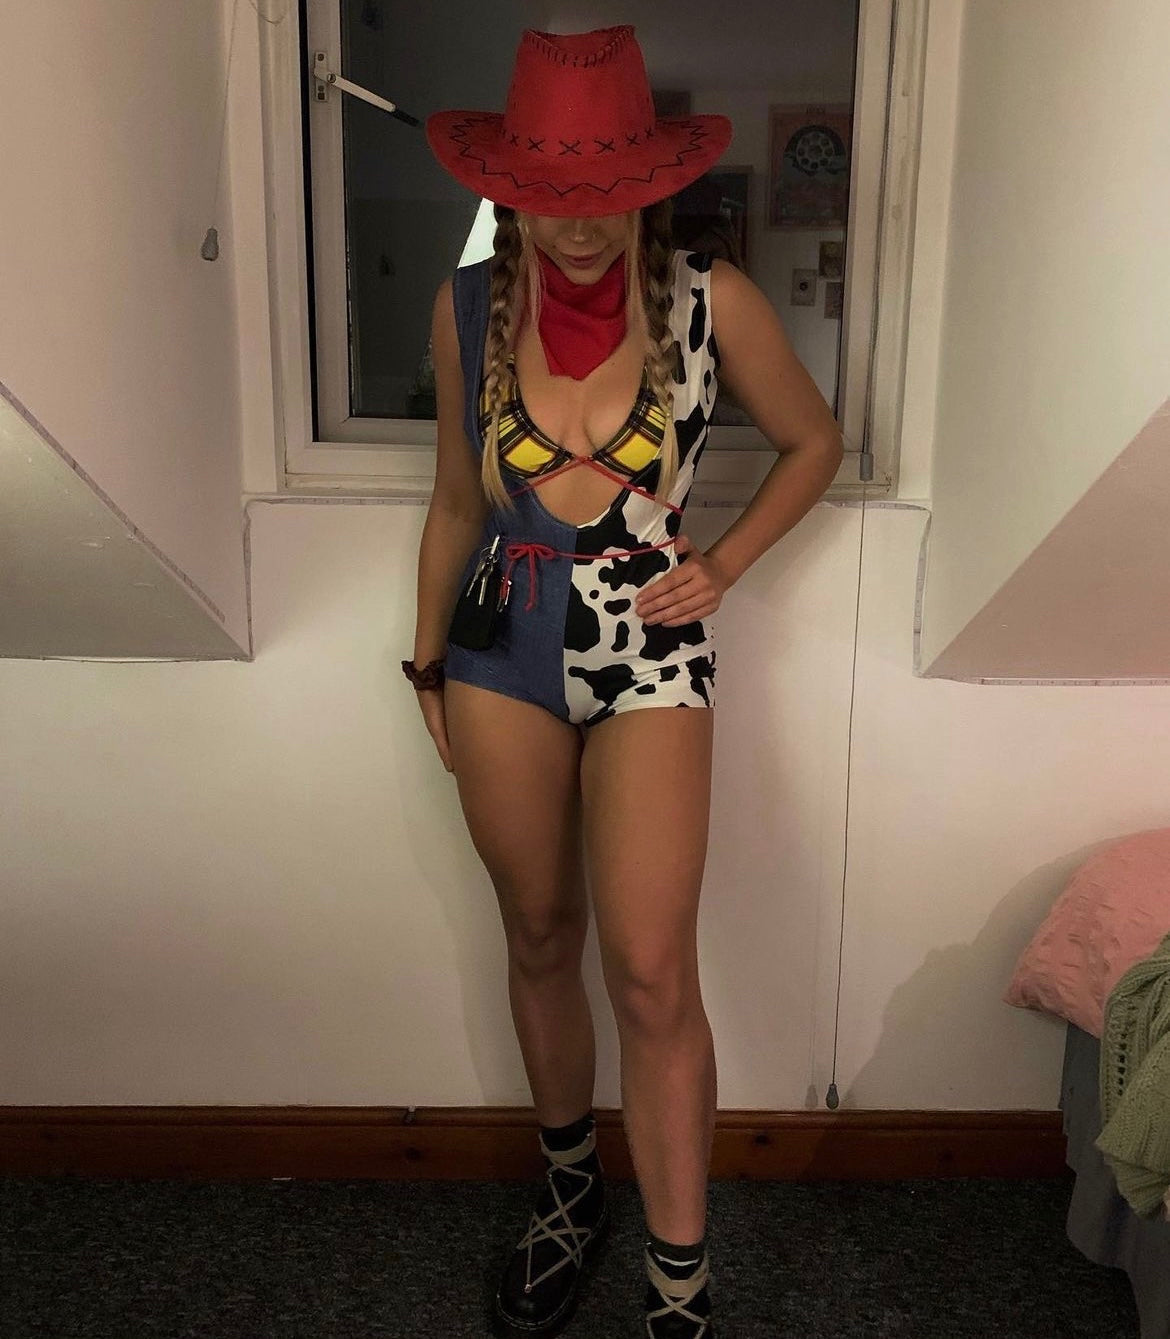 The cowgirl full outfit